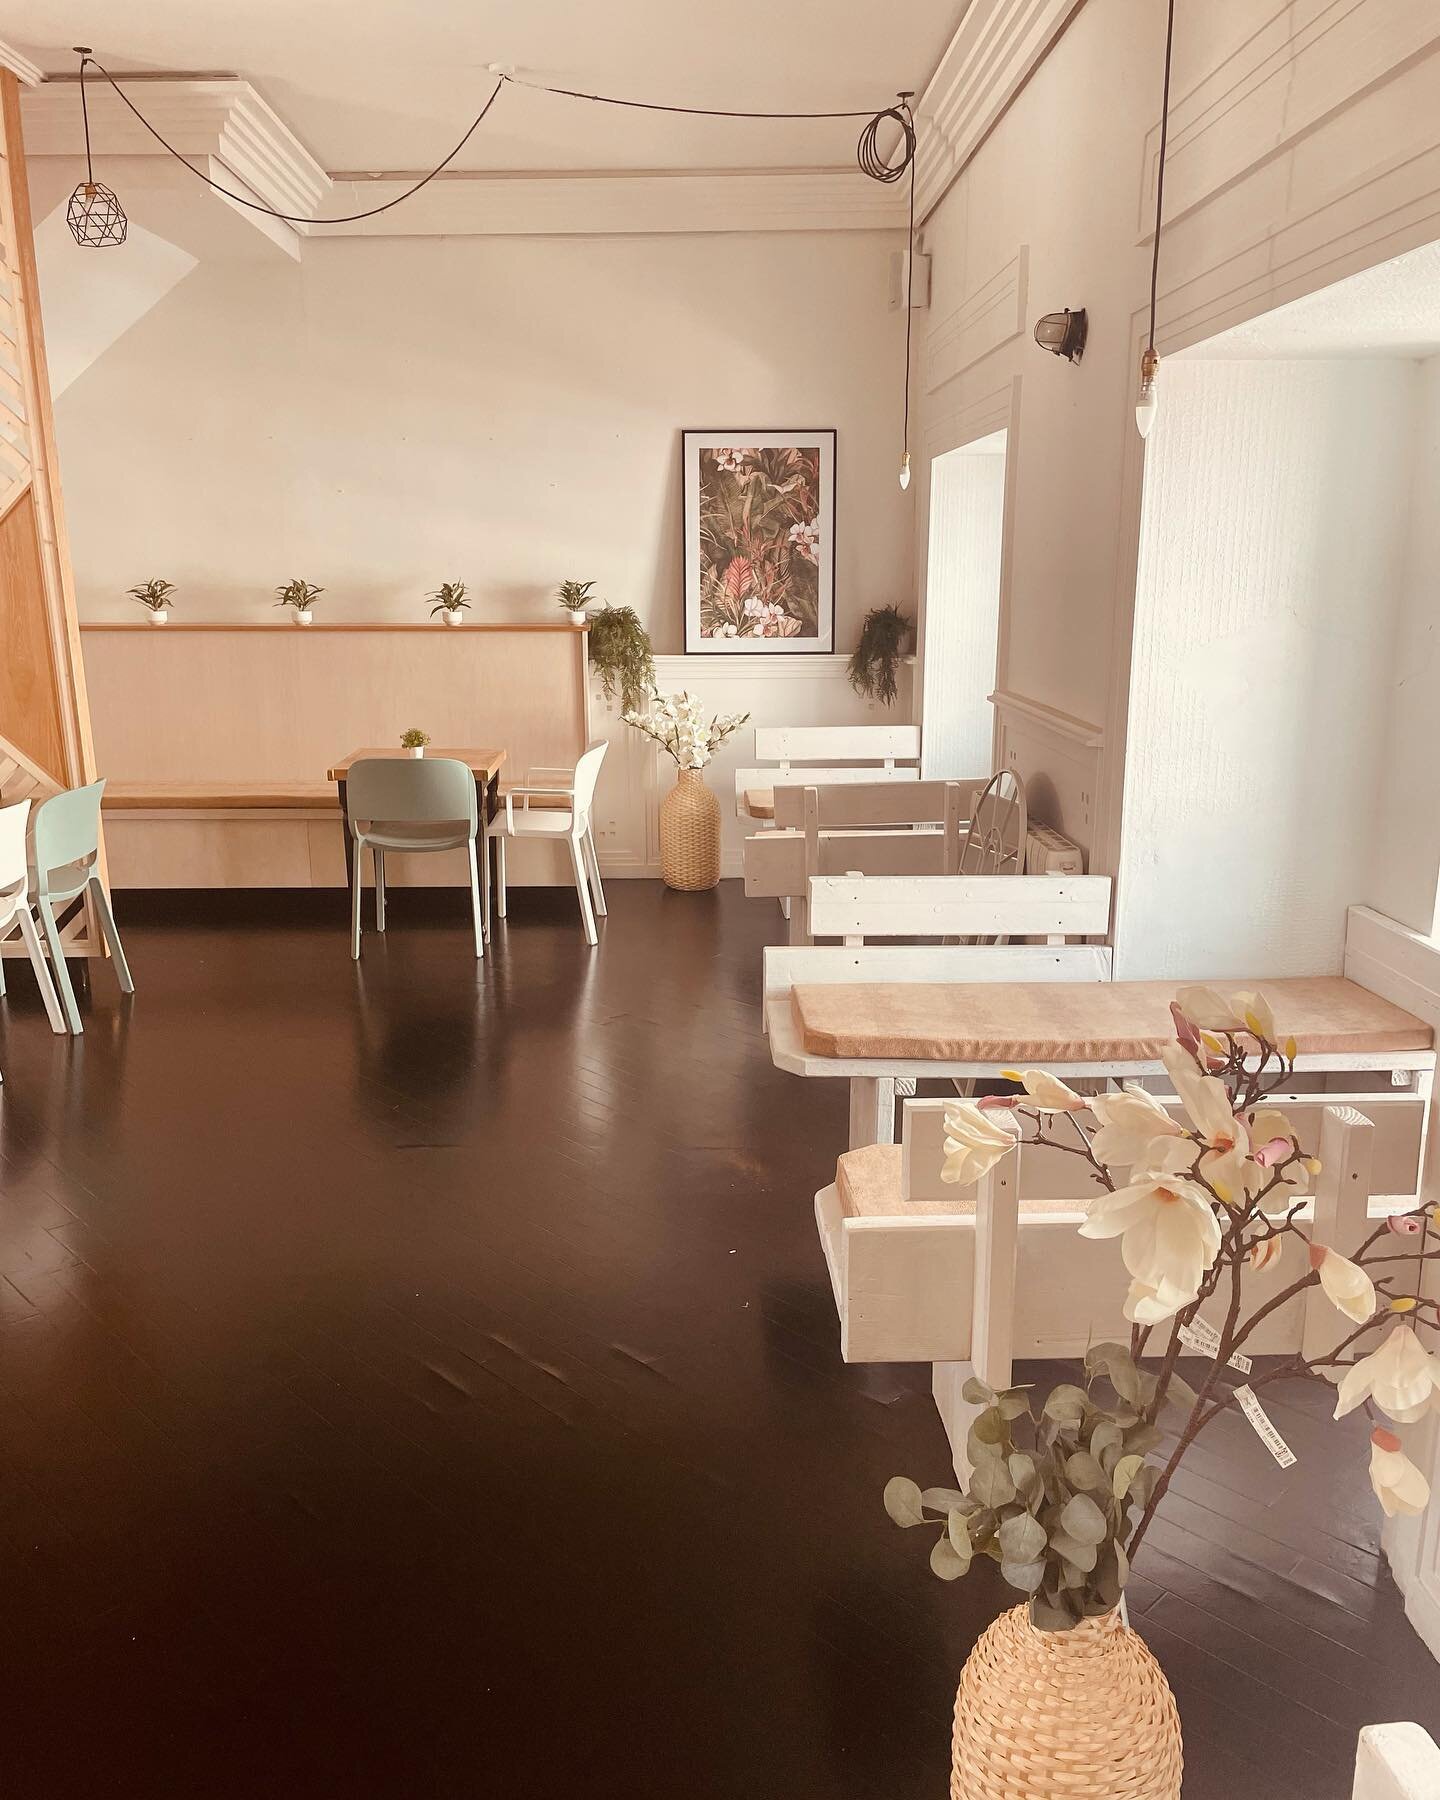 Almost there for our mini make over &hellip;. We are loving this zen floaty vibe we have created - restaurateur / interior designer team work makes the dream work  #redesign #chill #zen #teamwork #flowers #restaurantdesign #cafedesign #design #painti